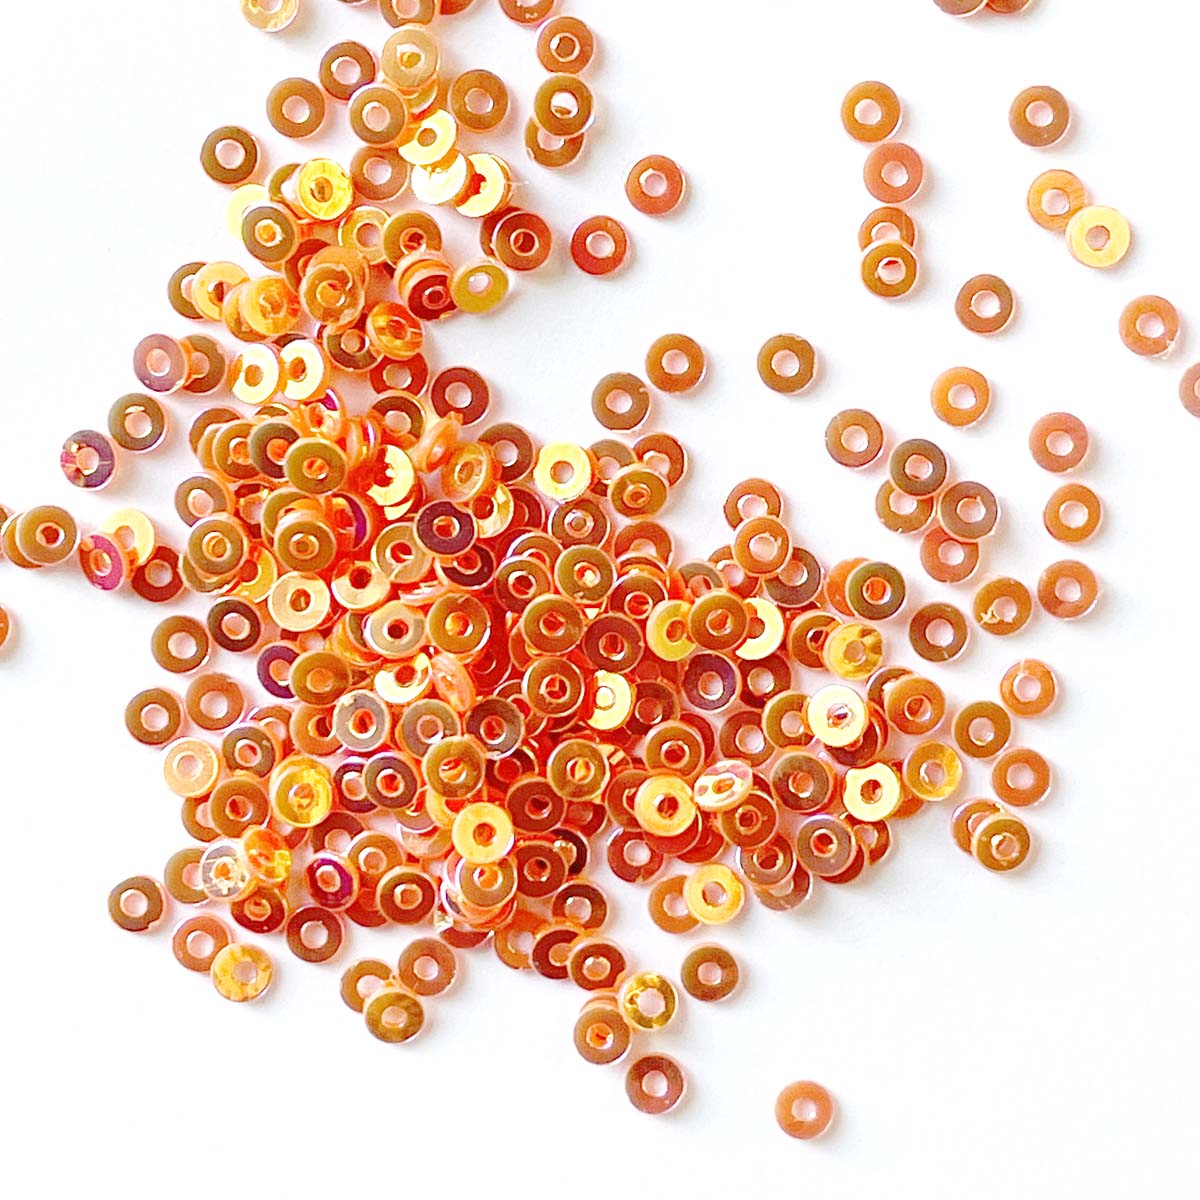 www.colourstreams.com.au Colour Streams Embroidery Stitching Embellishments Costumes Theatre Sequins Shiny Glitter Flat Circle Orange 3mm S230